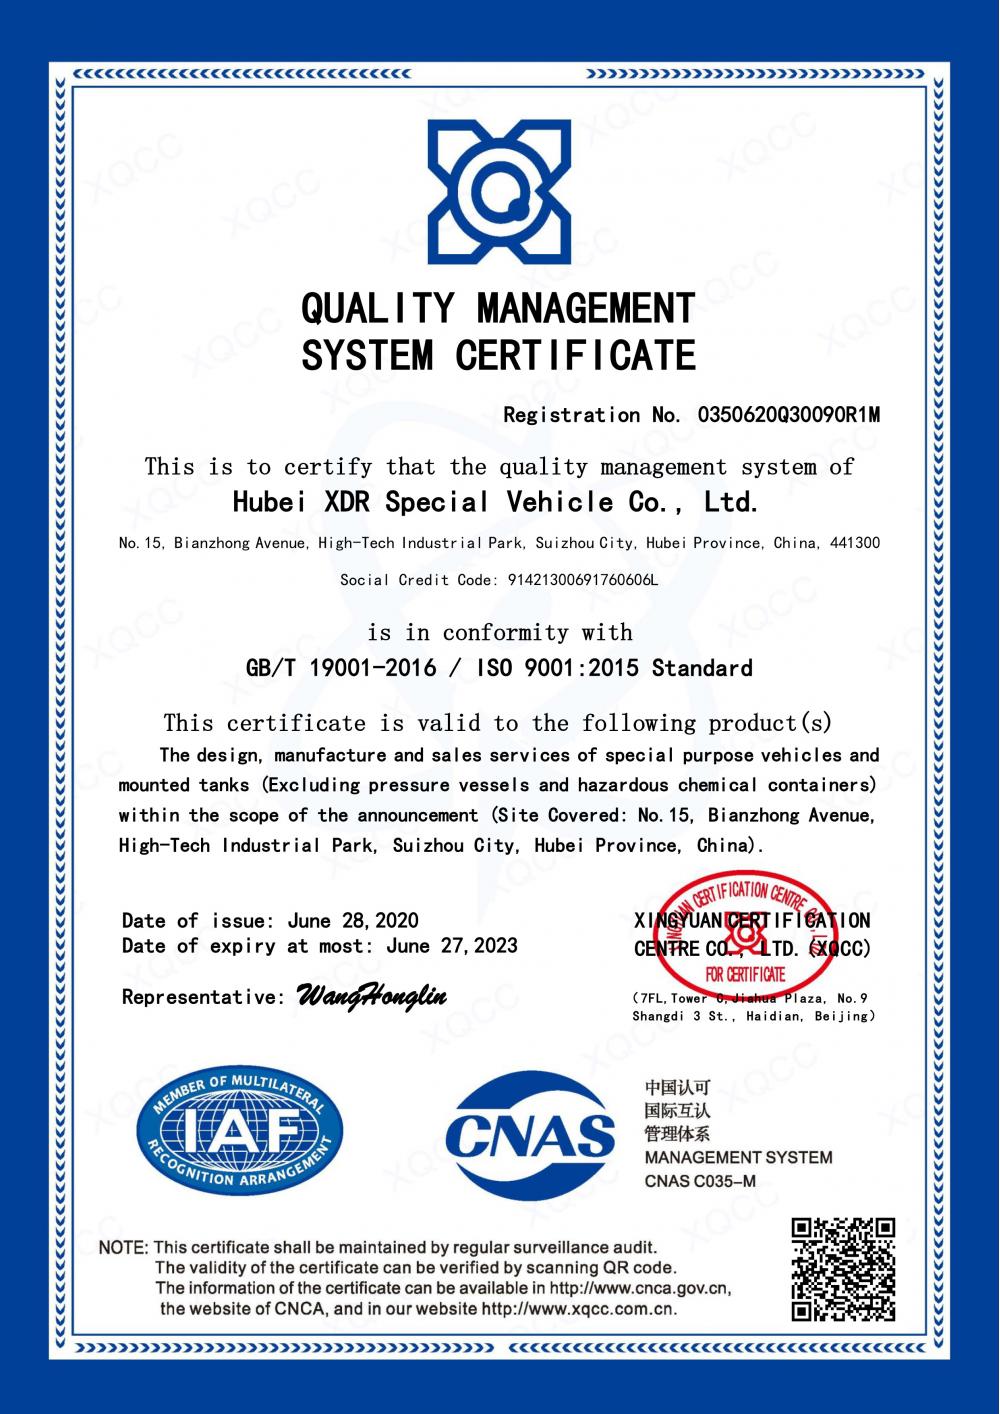 QUALITY MANAGEMENT SYSTEM CERTIFICATE 